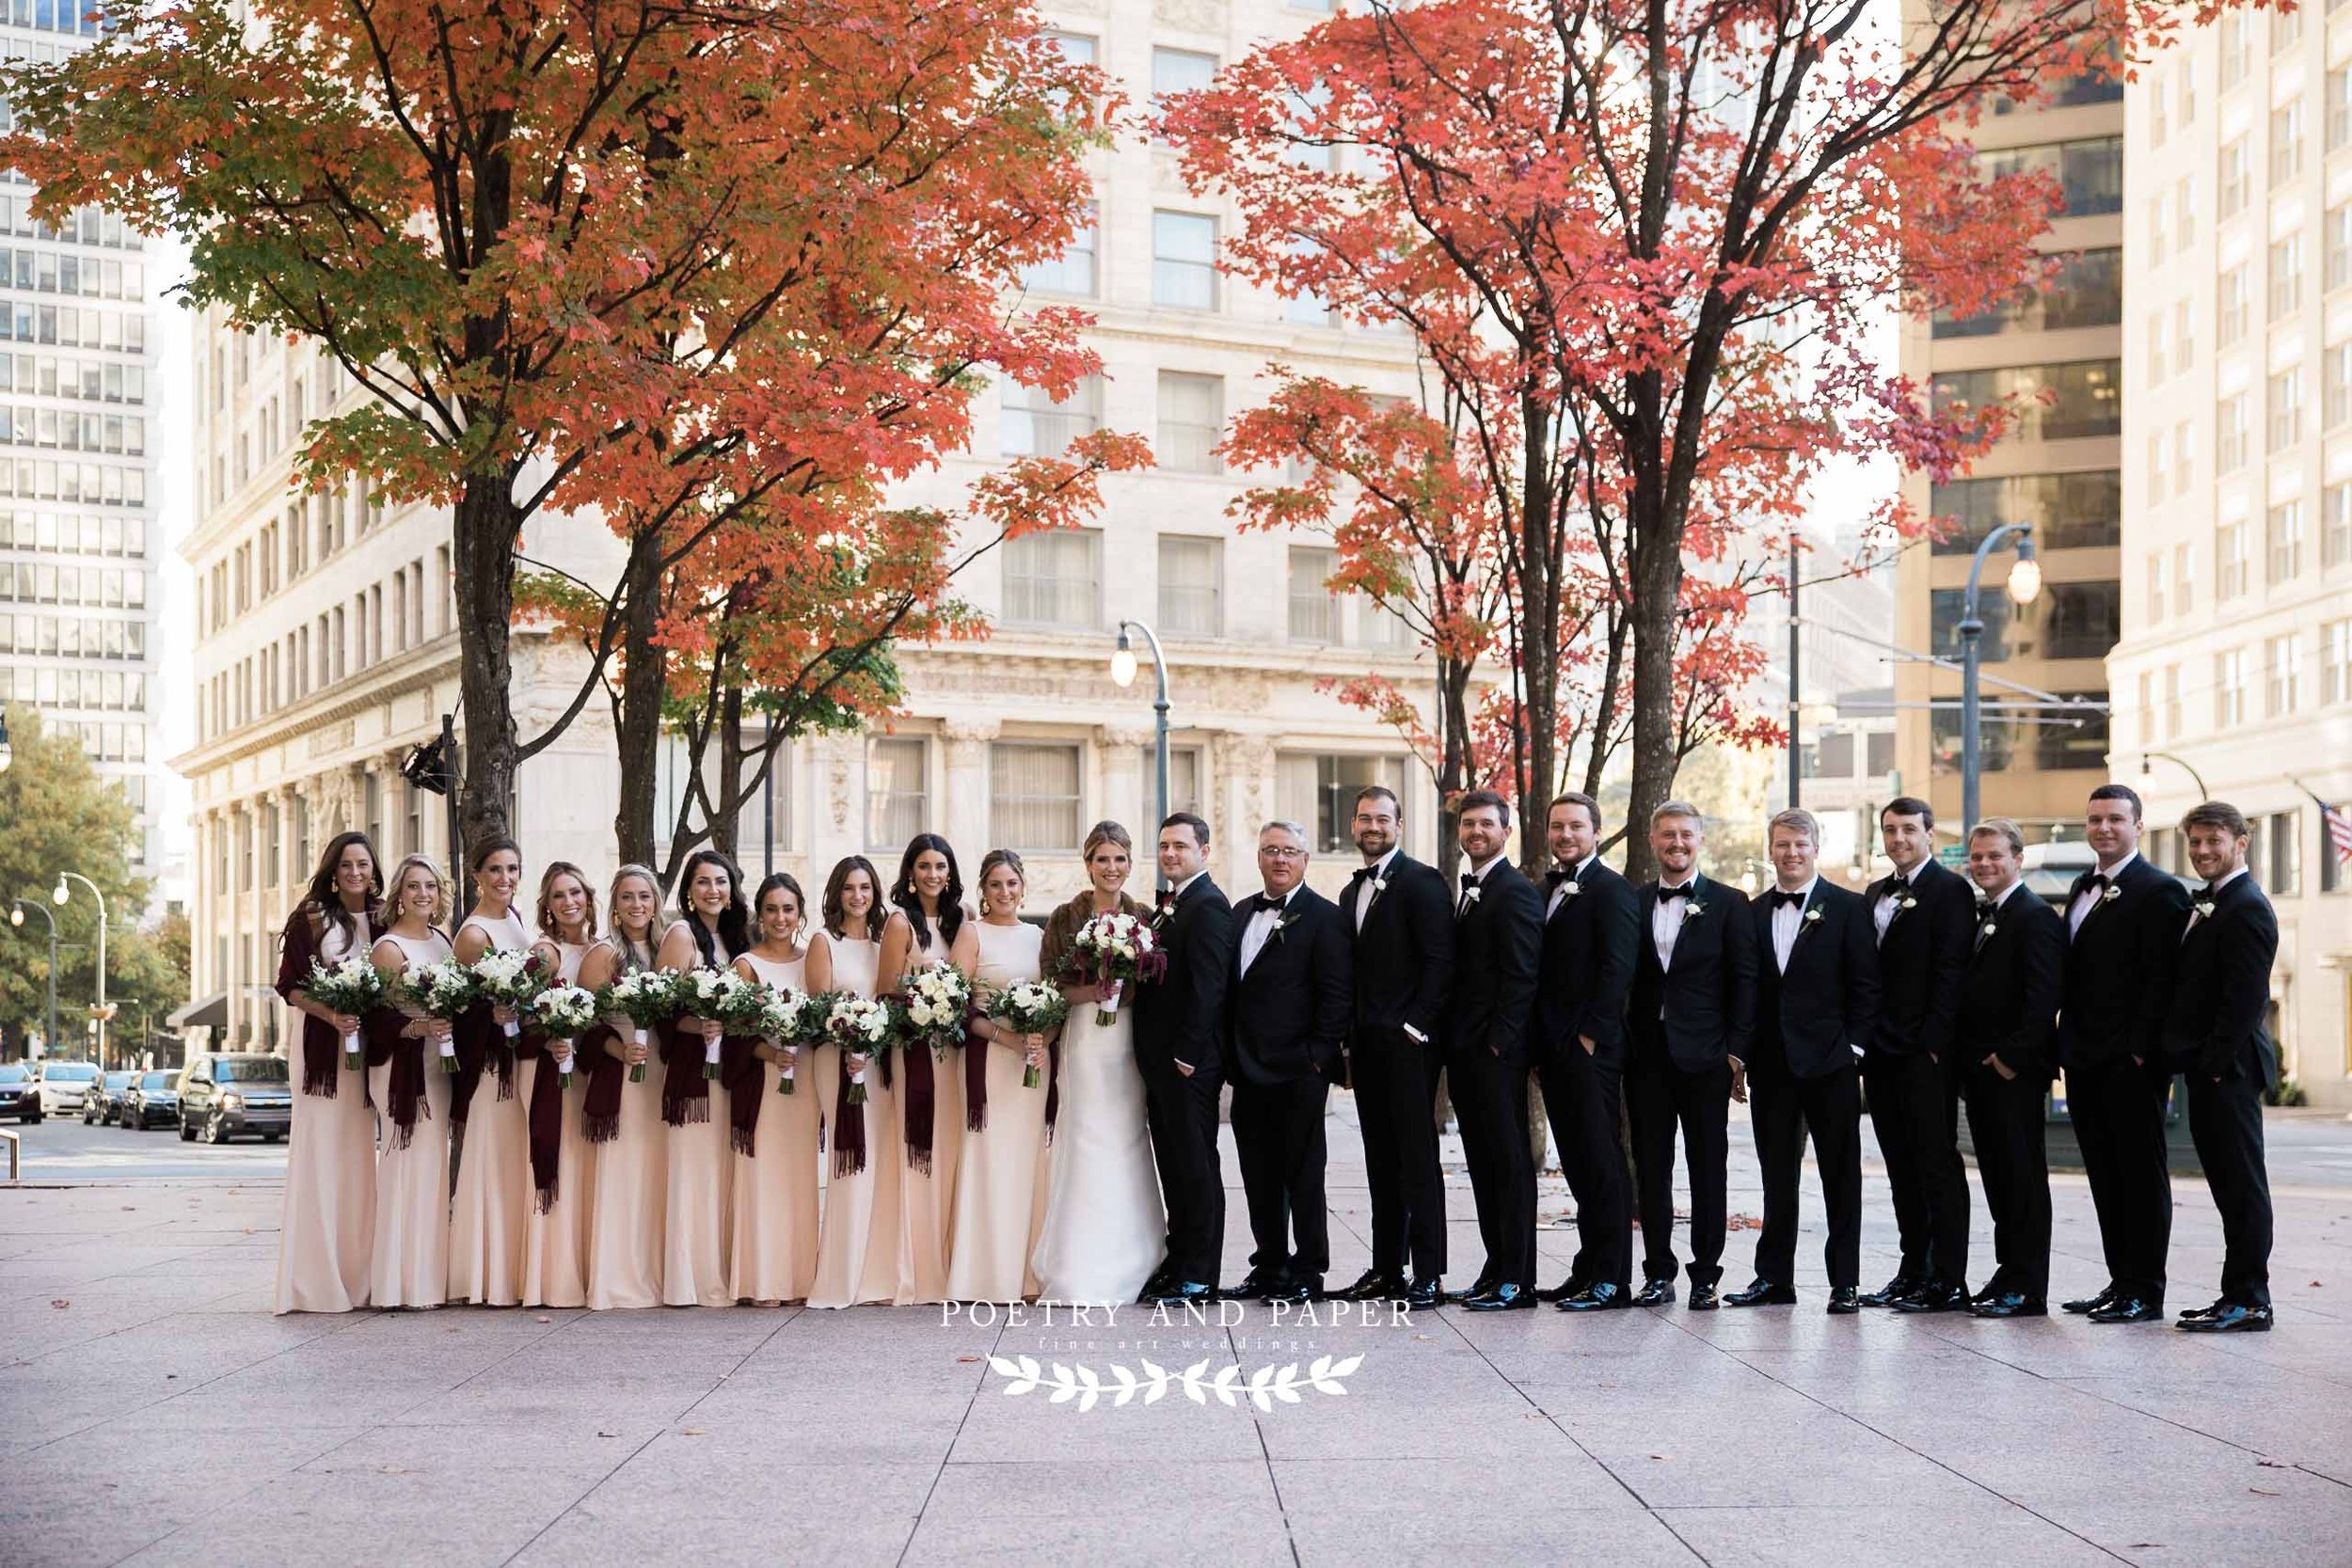 Top Destination Wedding Photographer- Timeless- Poetry and Paper- Dawn Johnson-bridal party posing in midtown Atlanta city view.jpg